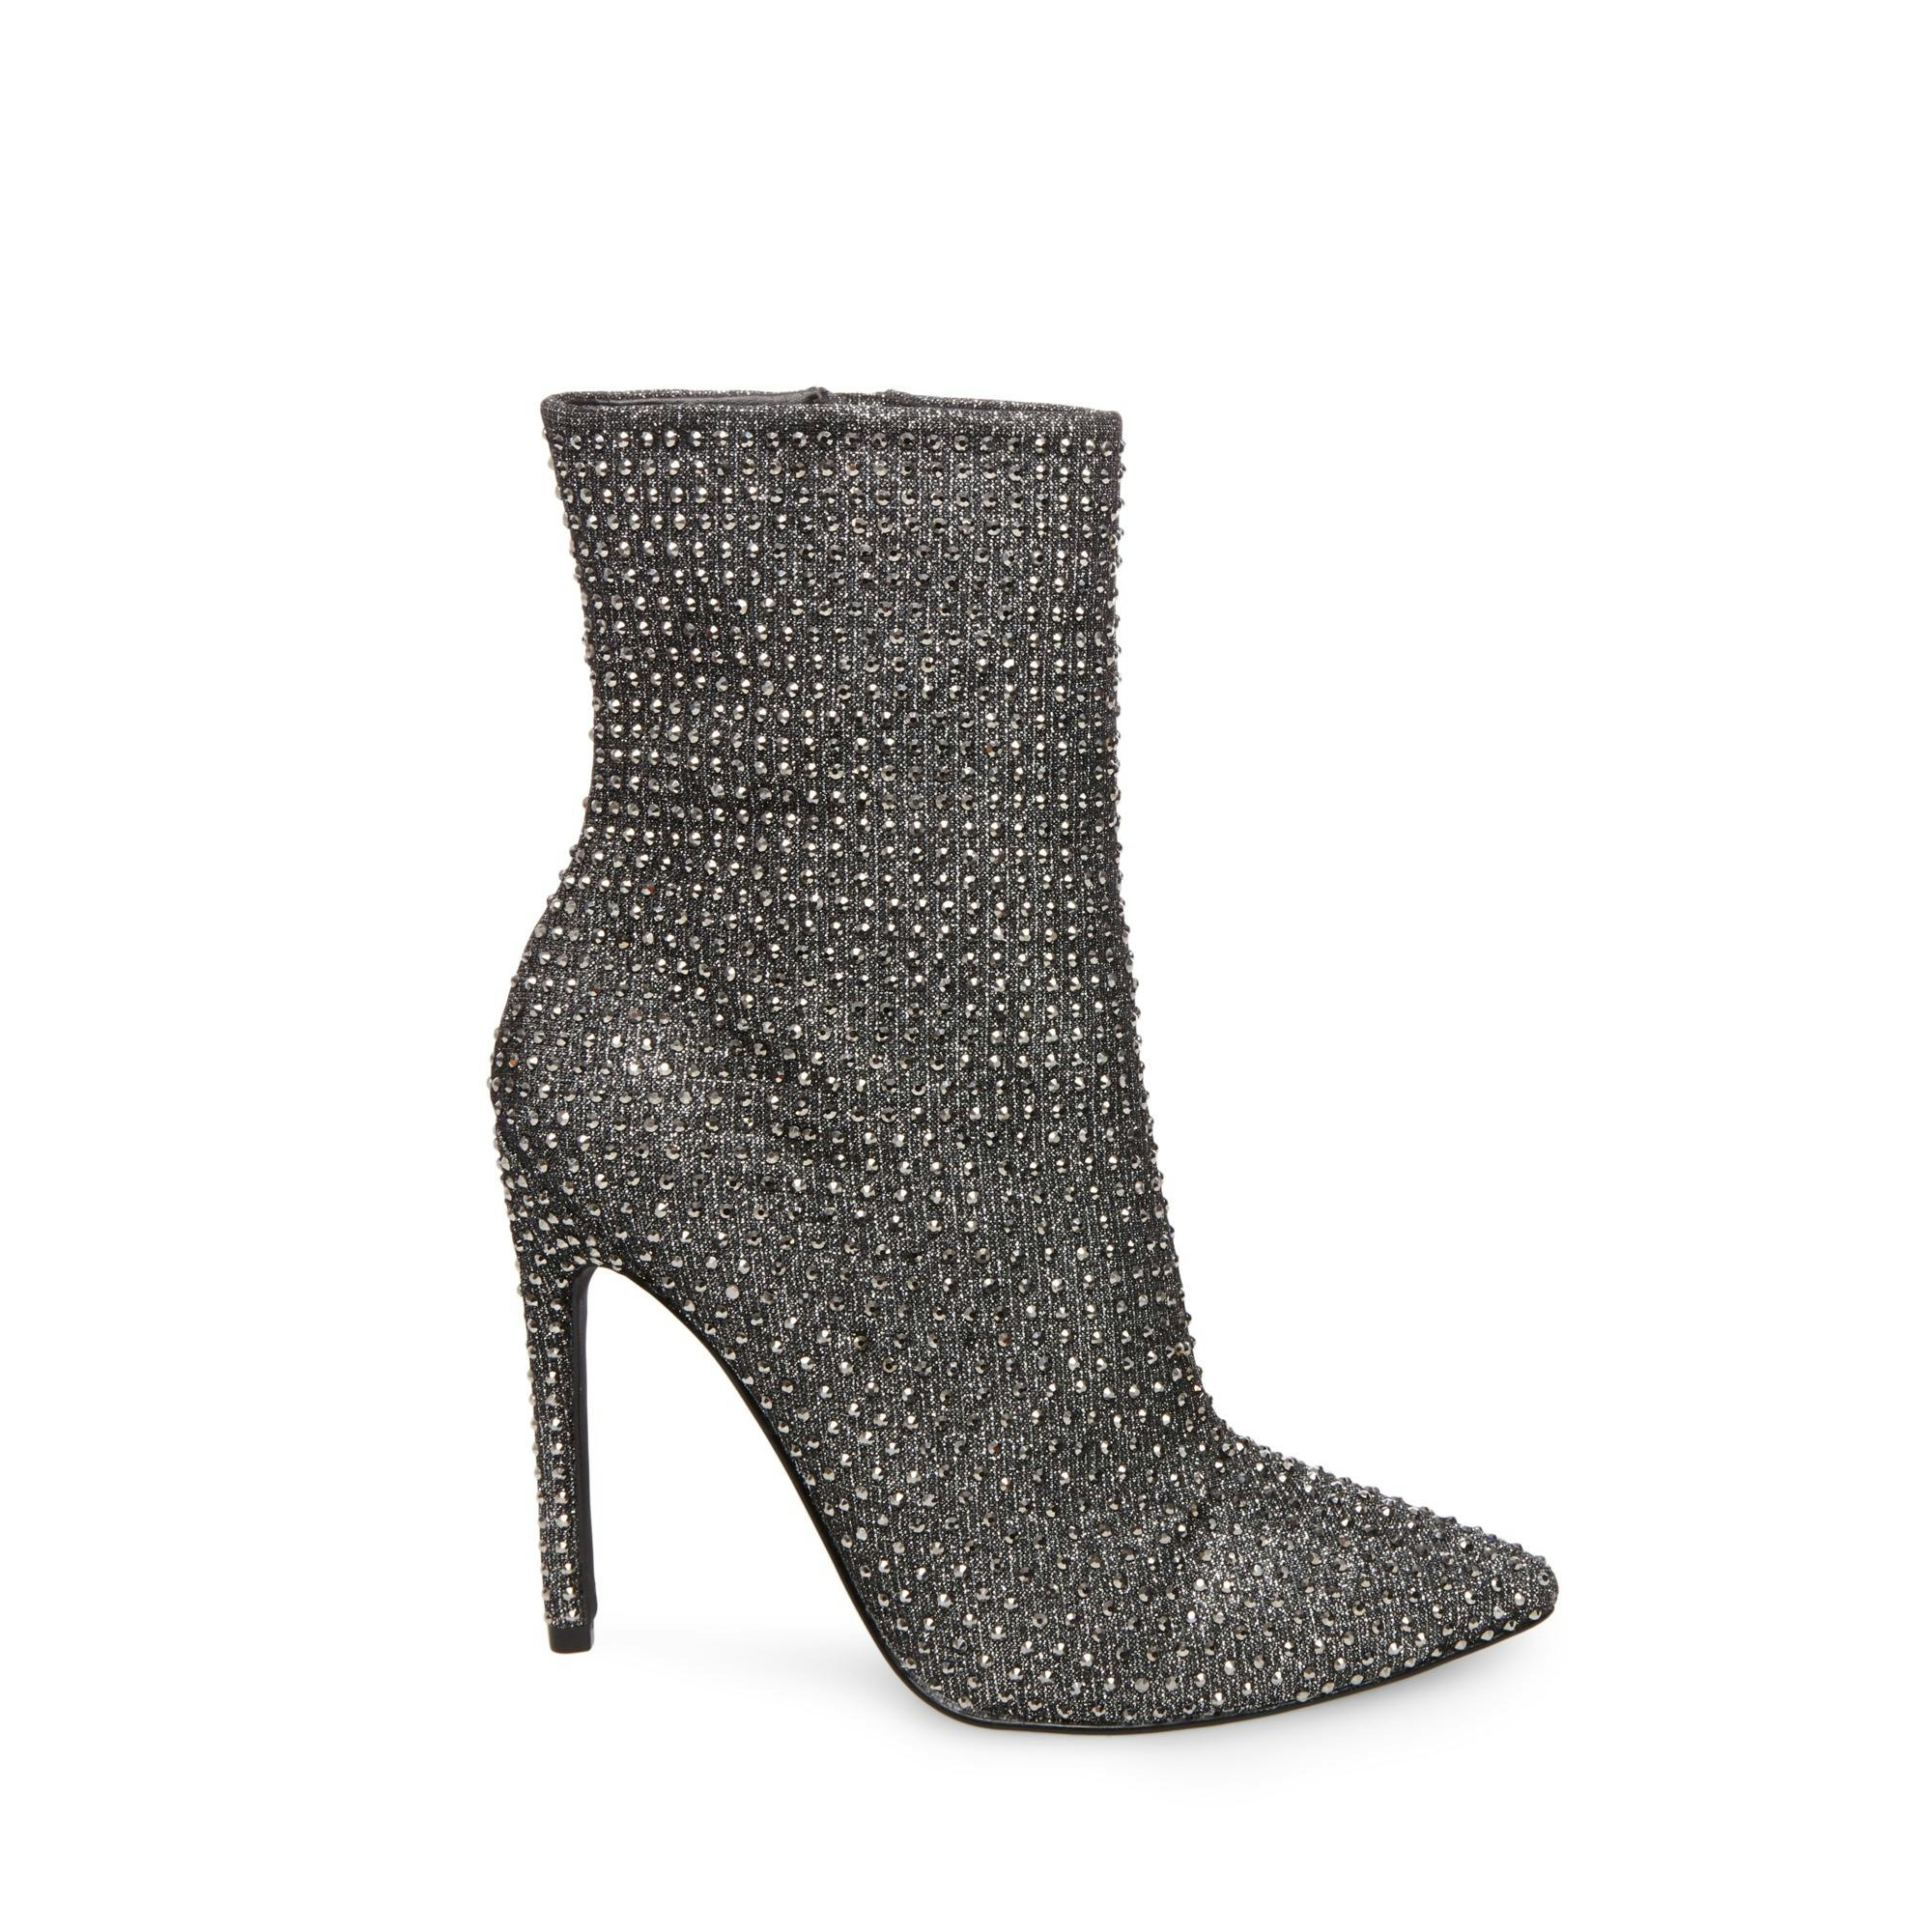 steve madden bedazzled boots